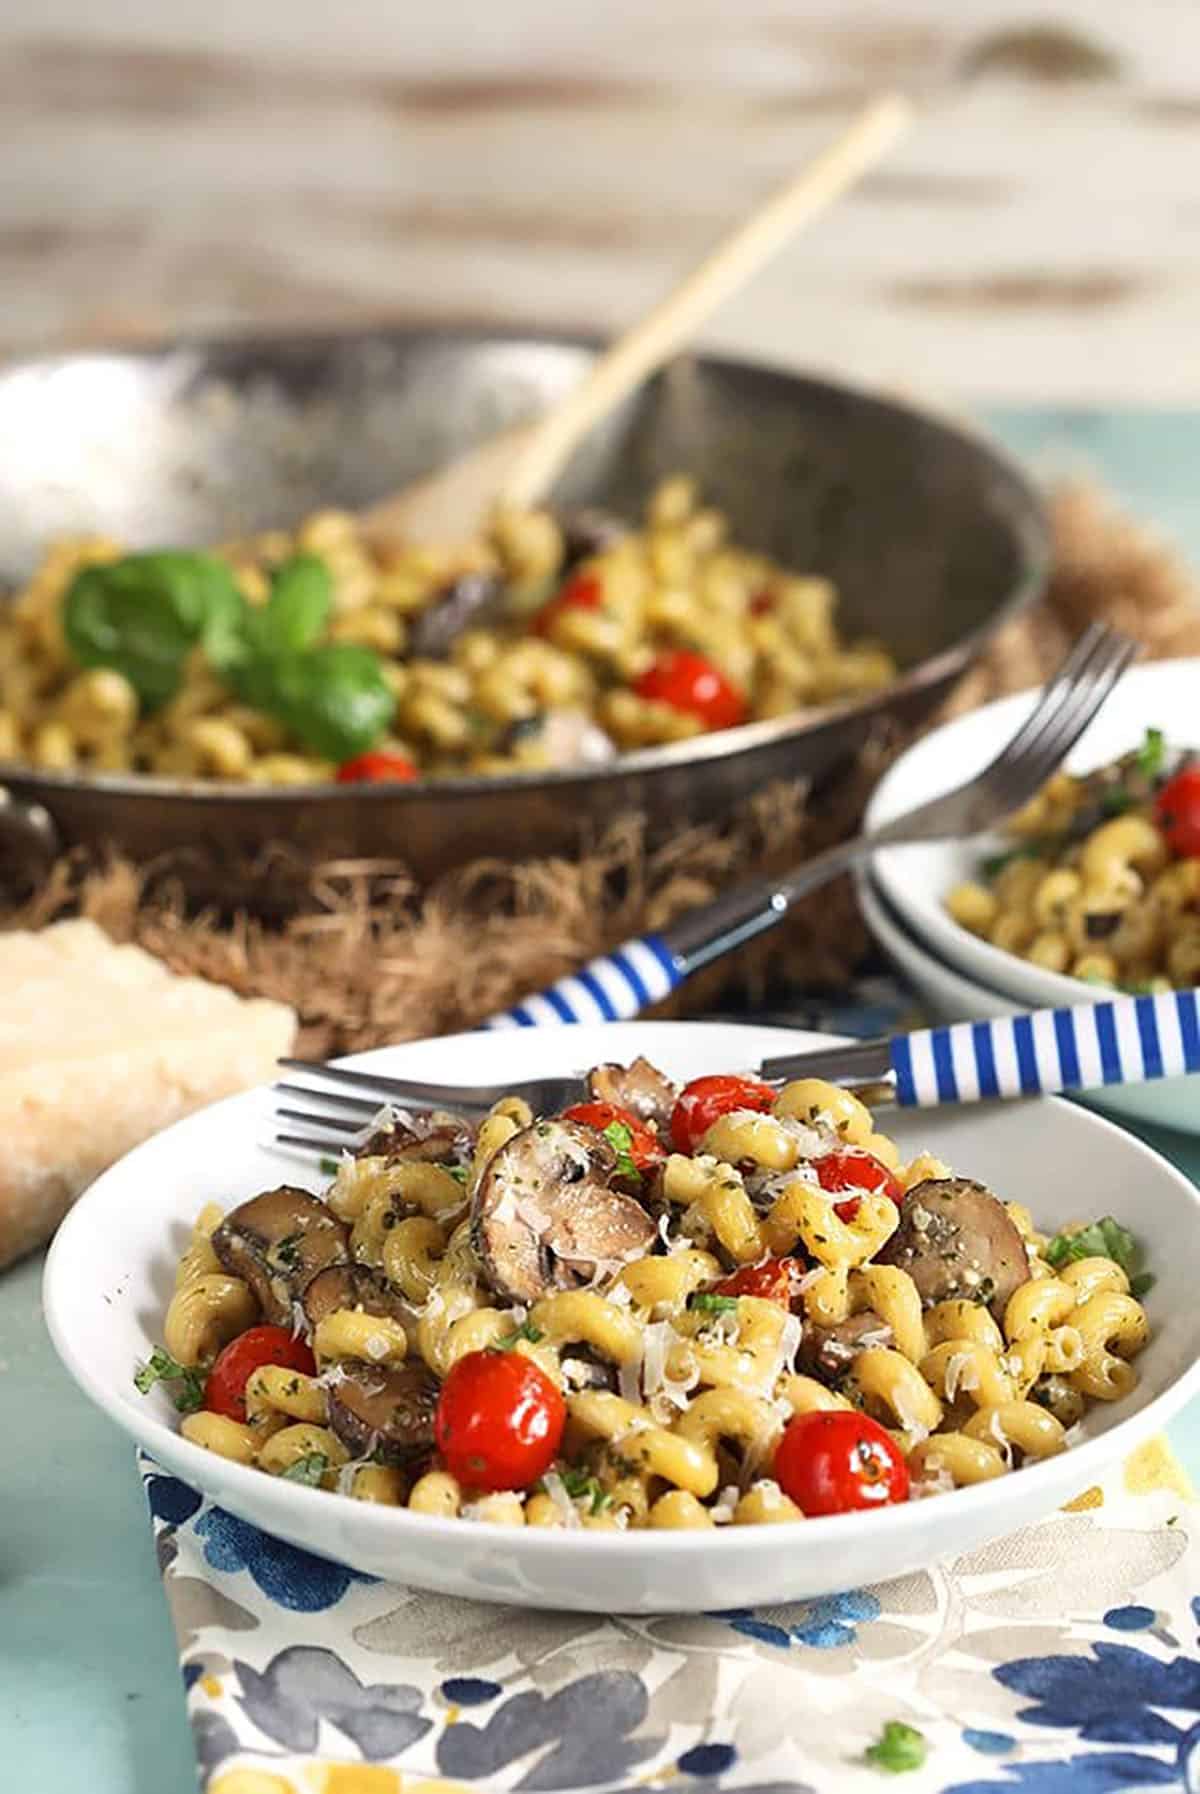 Pesto Cavatappi being served from a skillet into a white bowl.